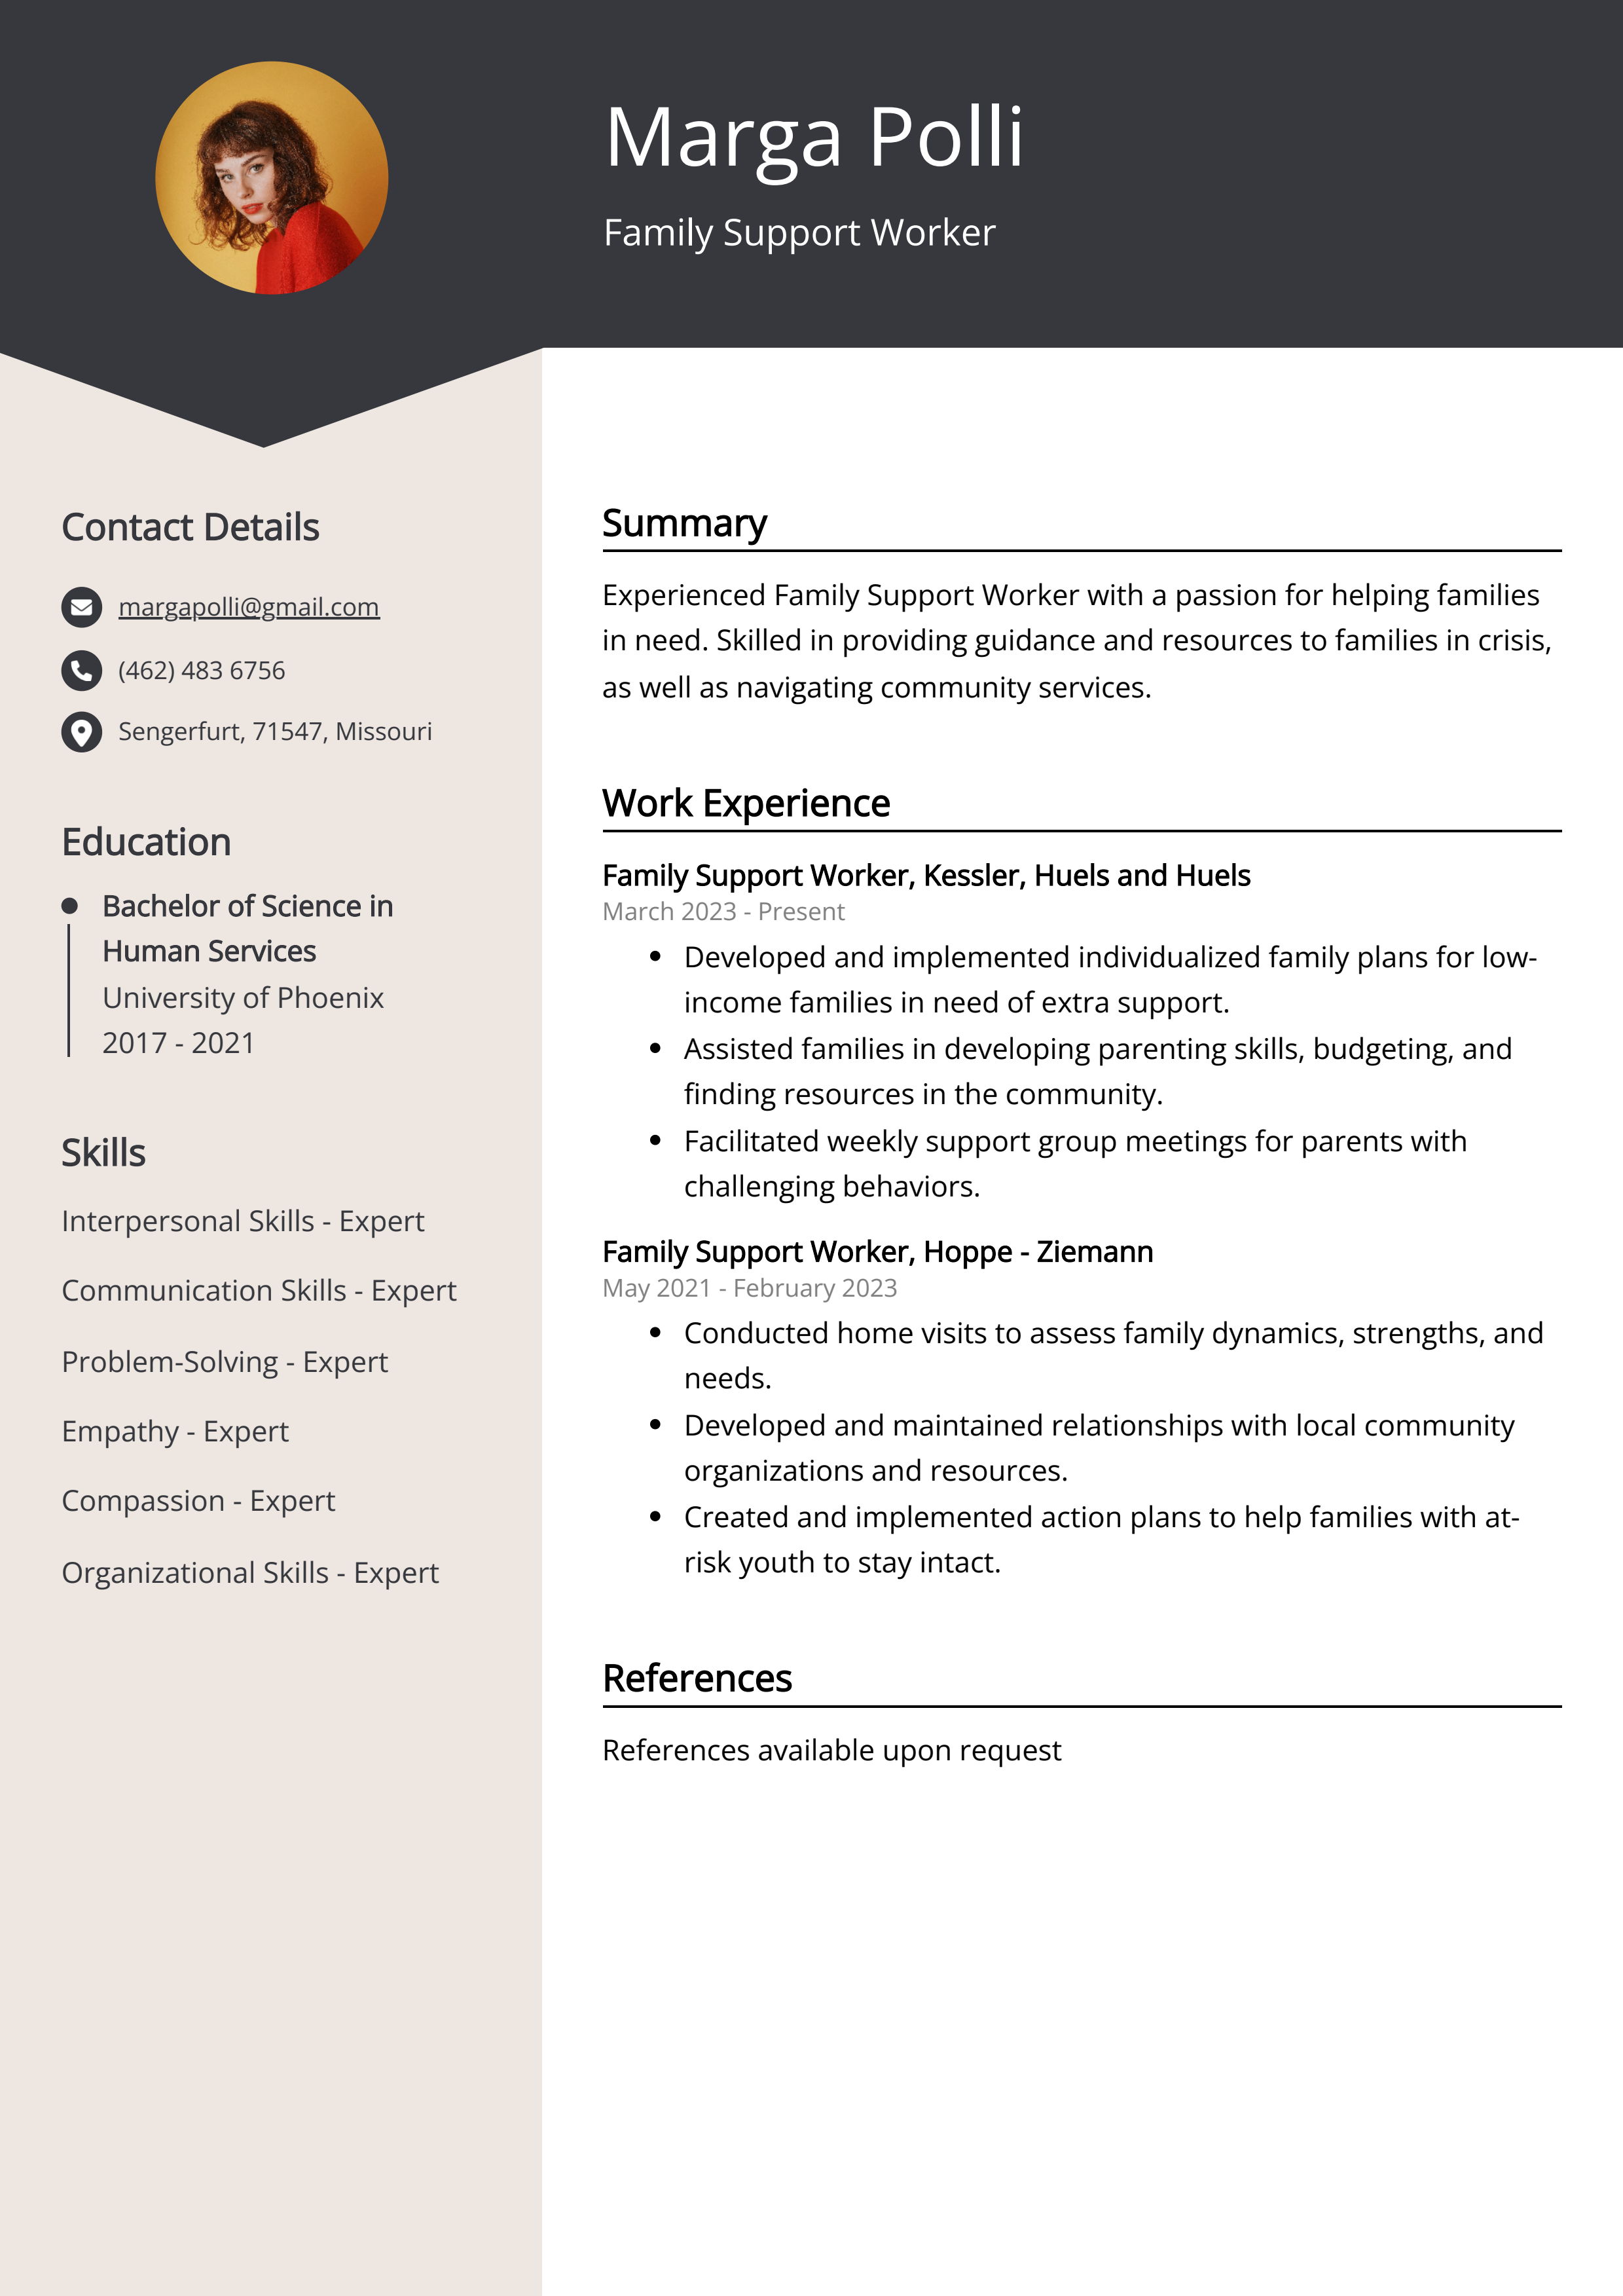 Family Support Worker CV Example